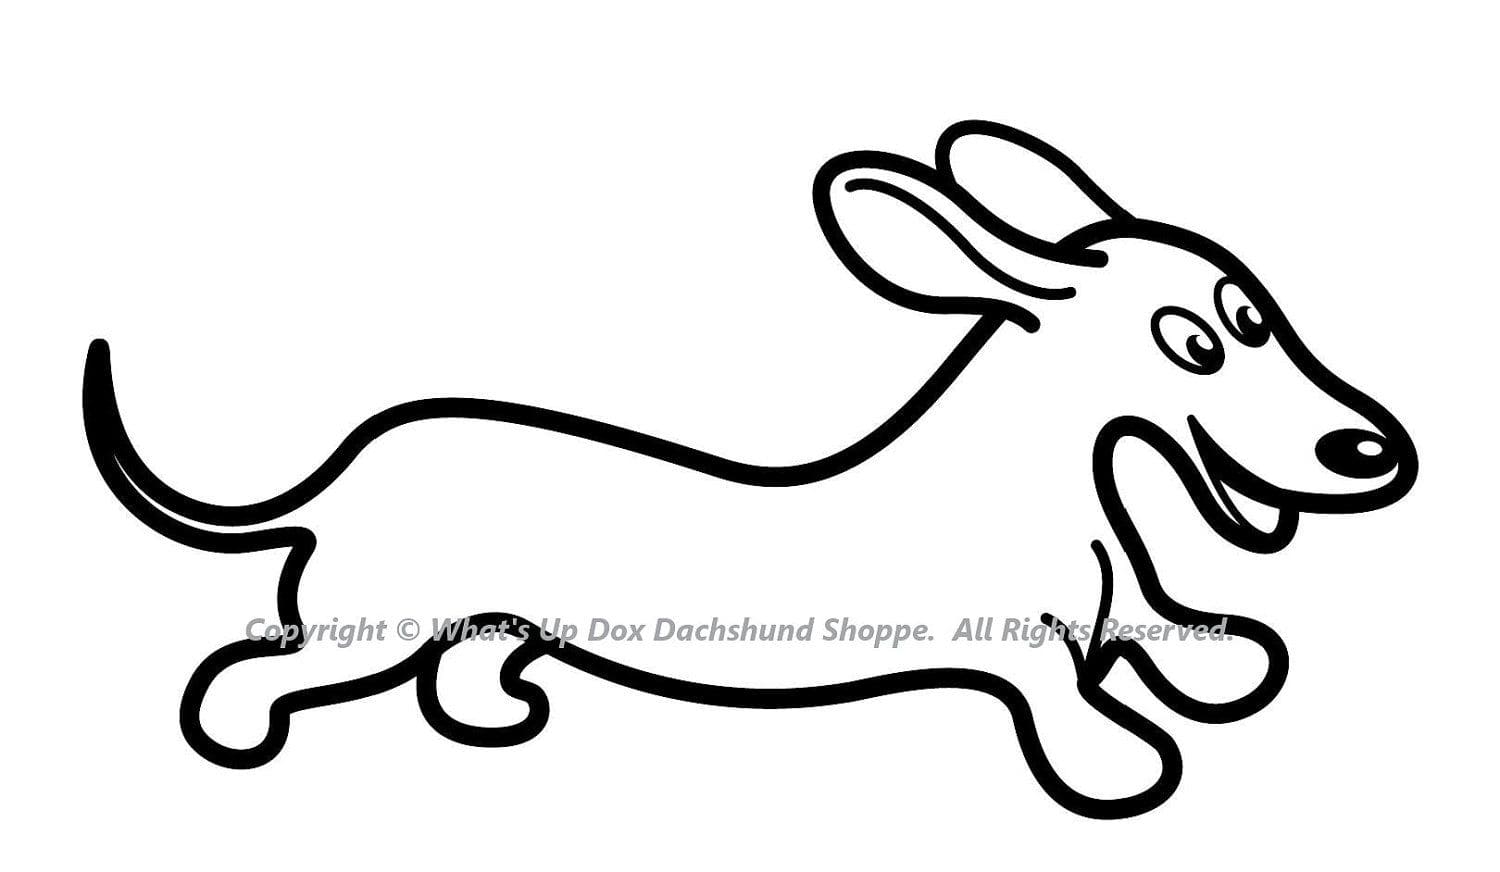 Dachshund Image Coloring Page